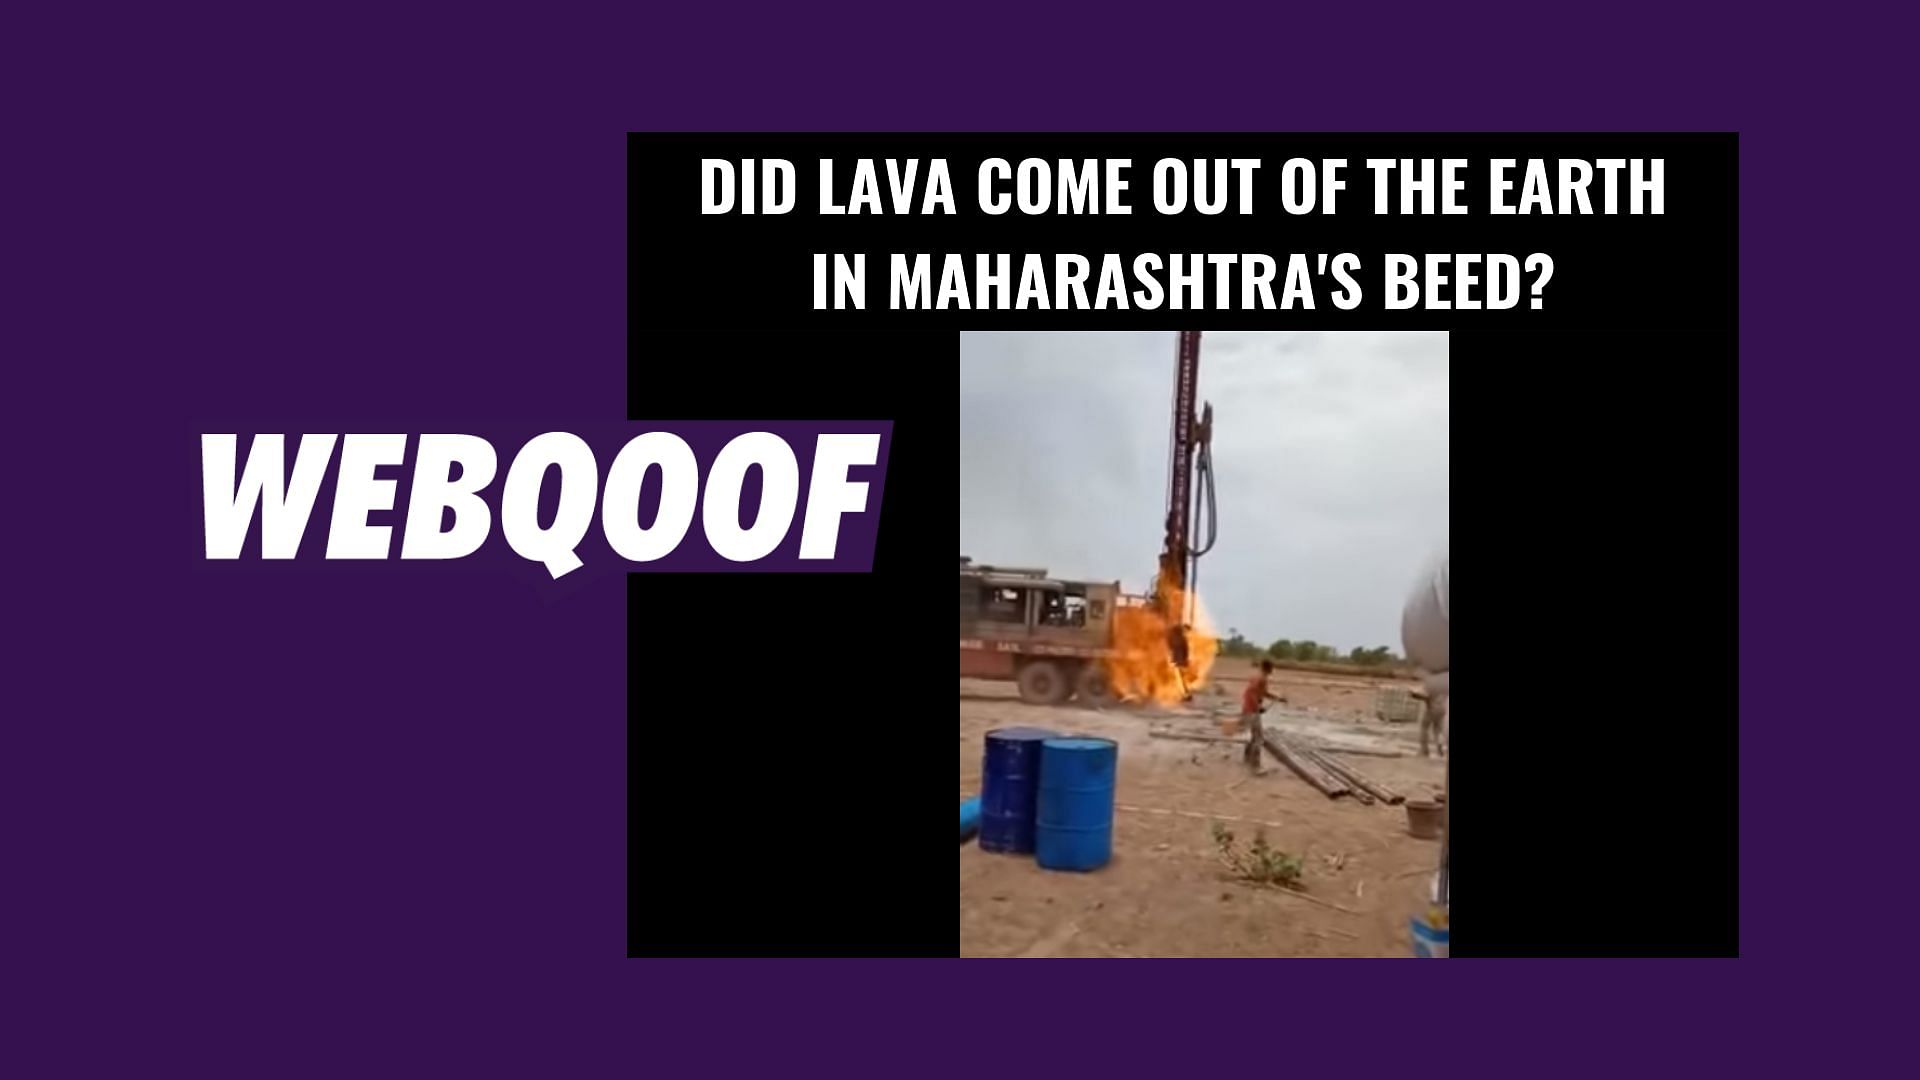 A viral video most likely falsely claimed that lava came out of the earth in Maharashtra’s Beed district.